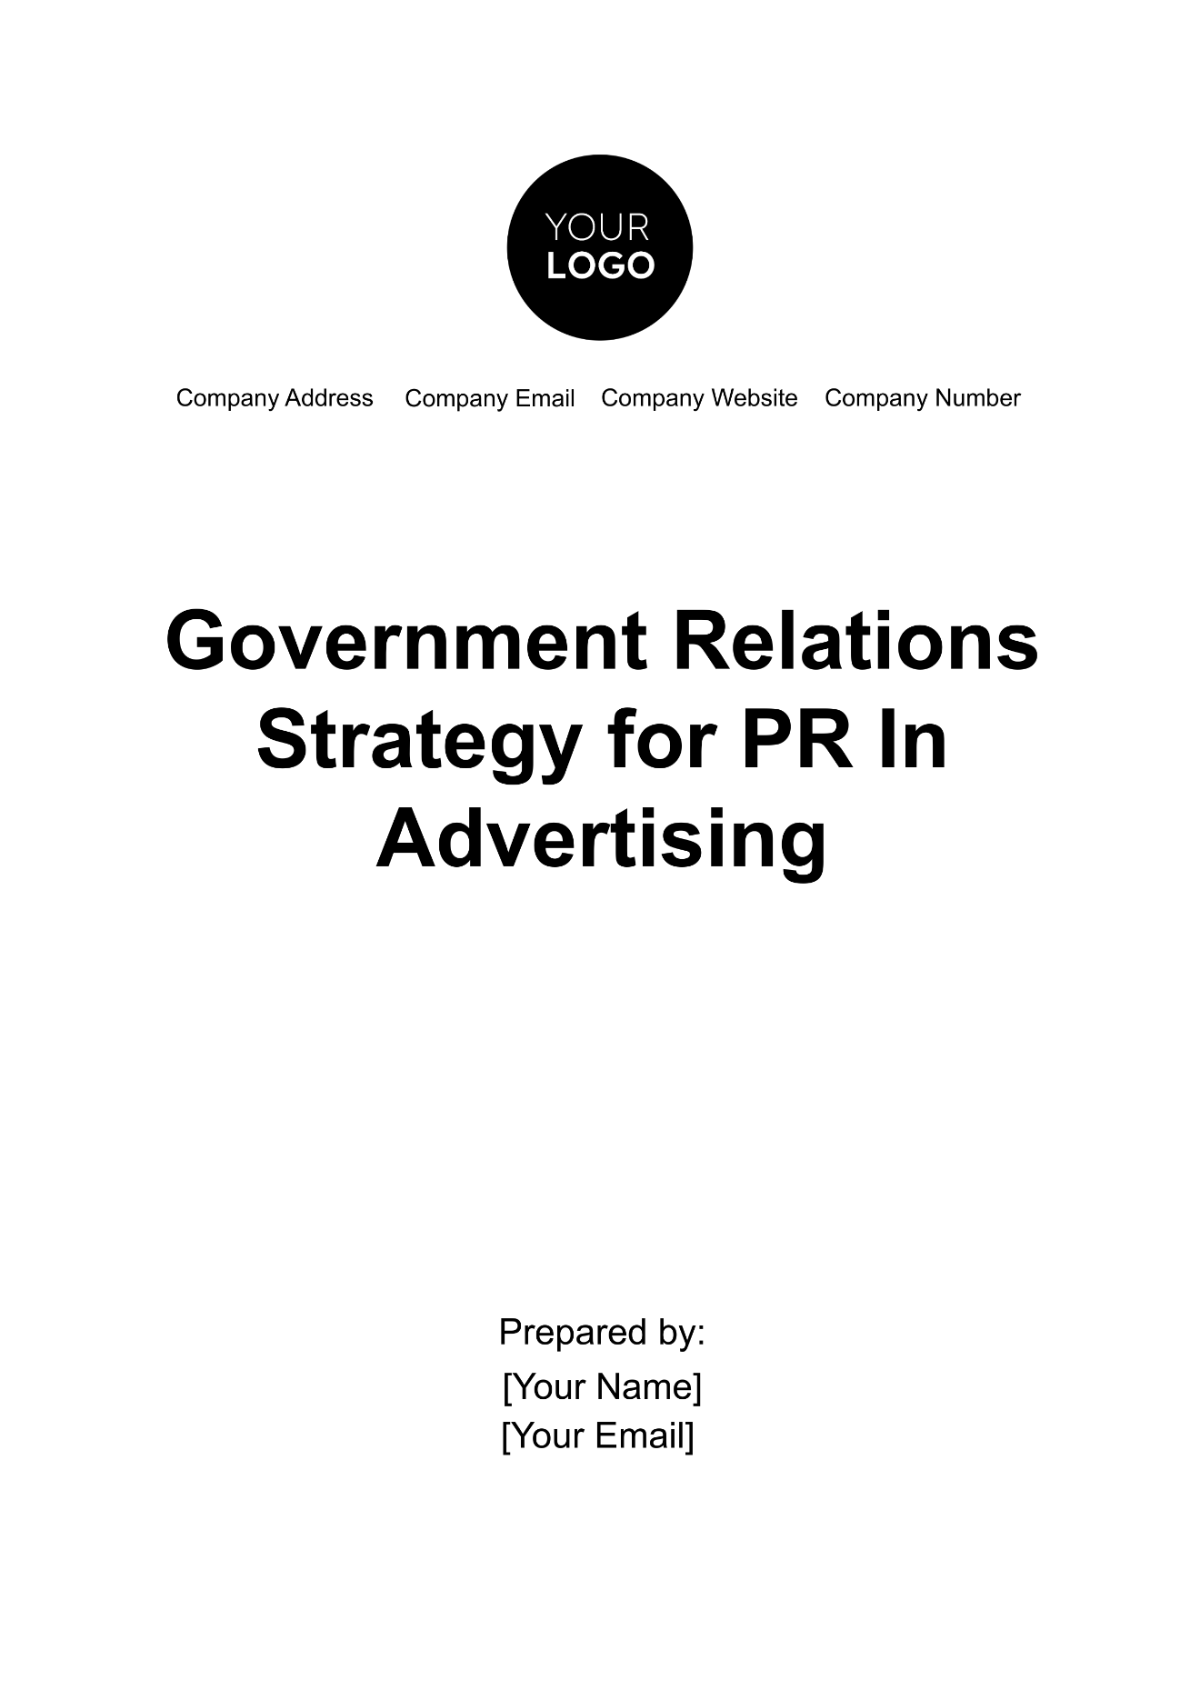 Government Relations Strategy for PR in Advertising Template